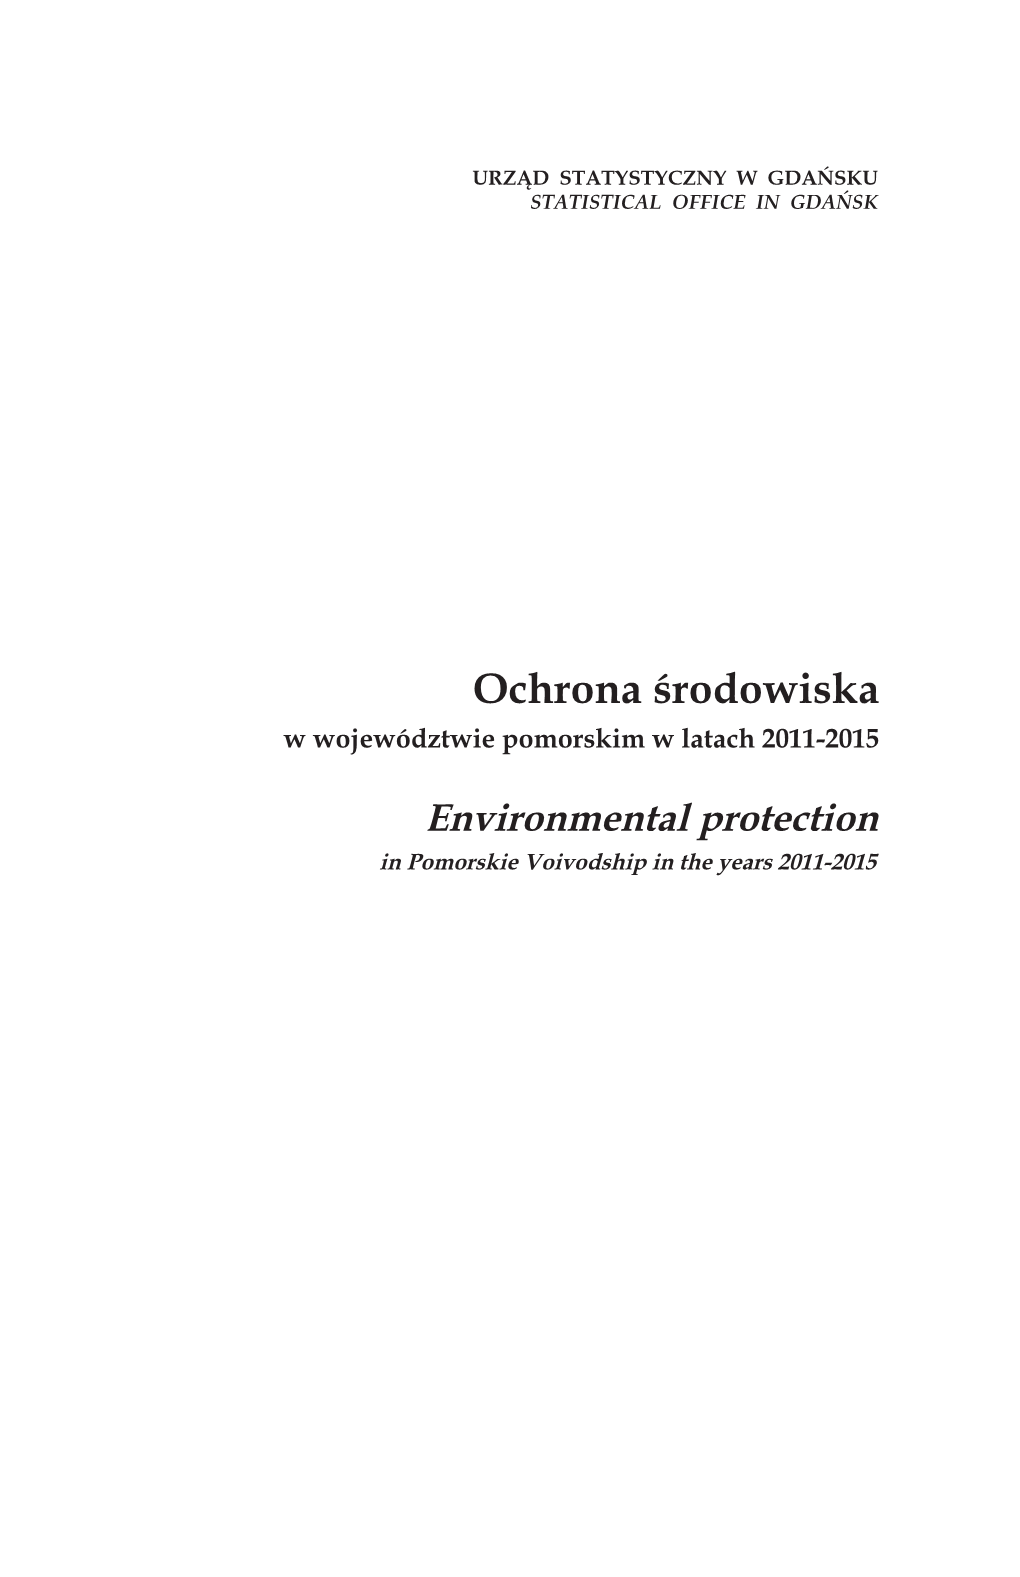 Environmental Protection in Pomorskie Voivodship in the Years 2011-2015 Is a Continuation of Earlier Papers on This Subject Issued by the Statistical Oﬃ Ce in Gdańsk